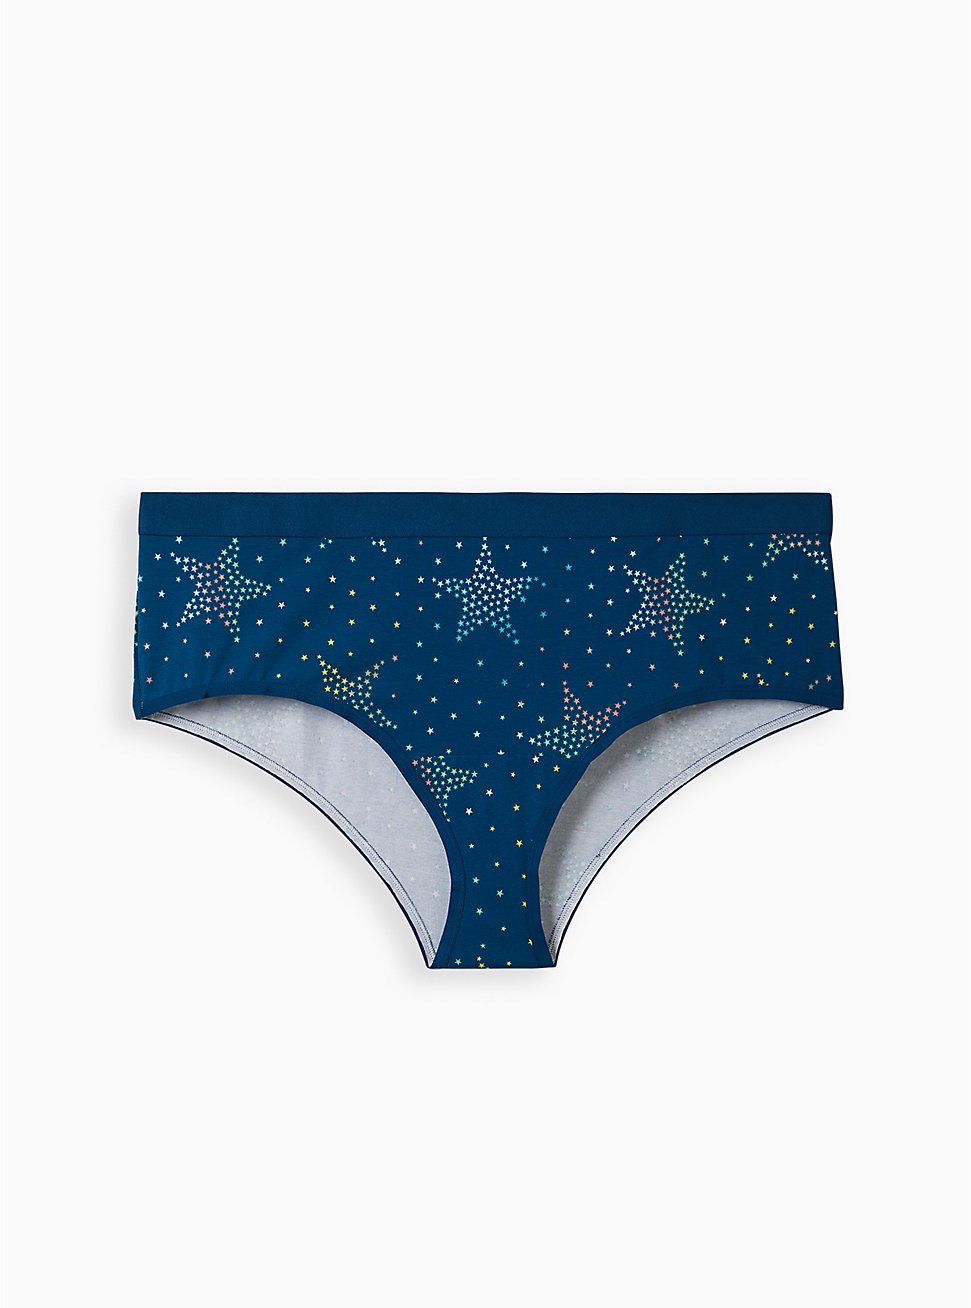 Cheeky Panty - Stars Blue, GLOW STAR CLUSTERS, hi-res